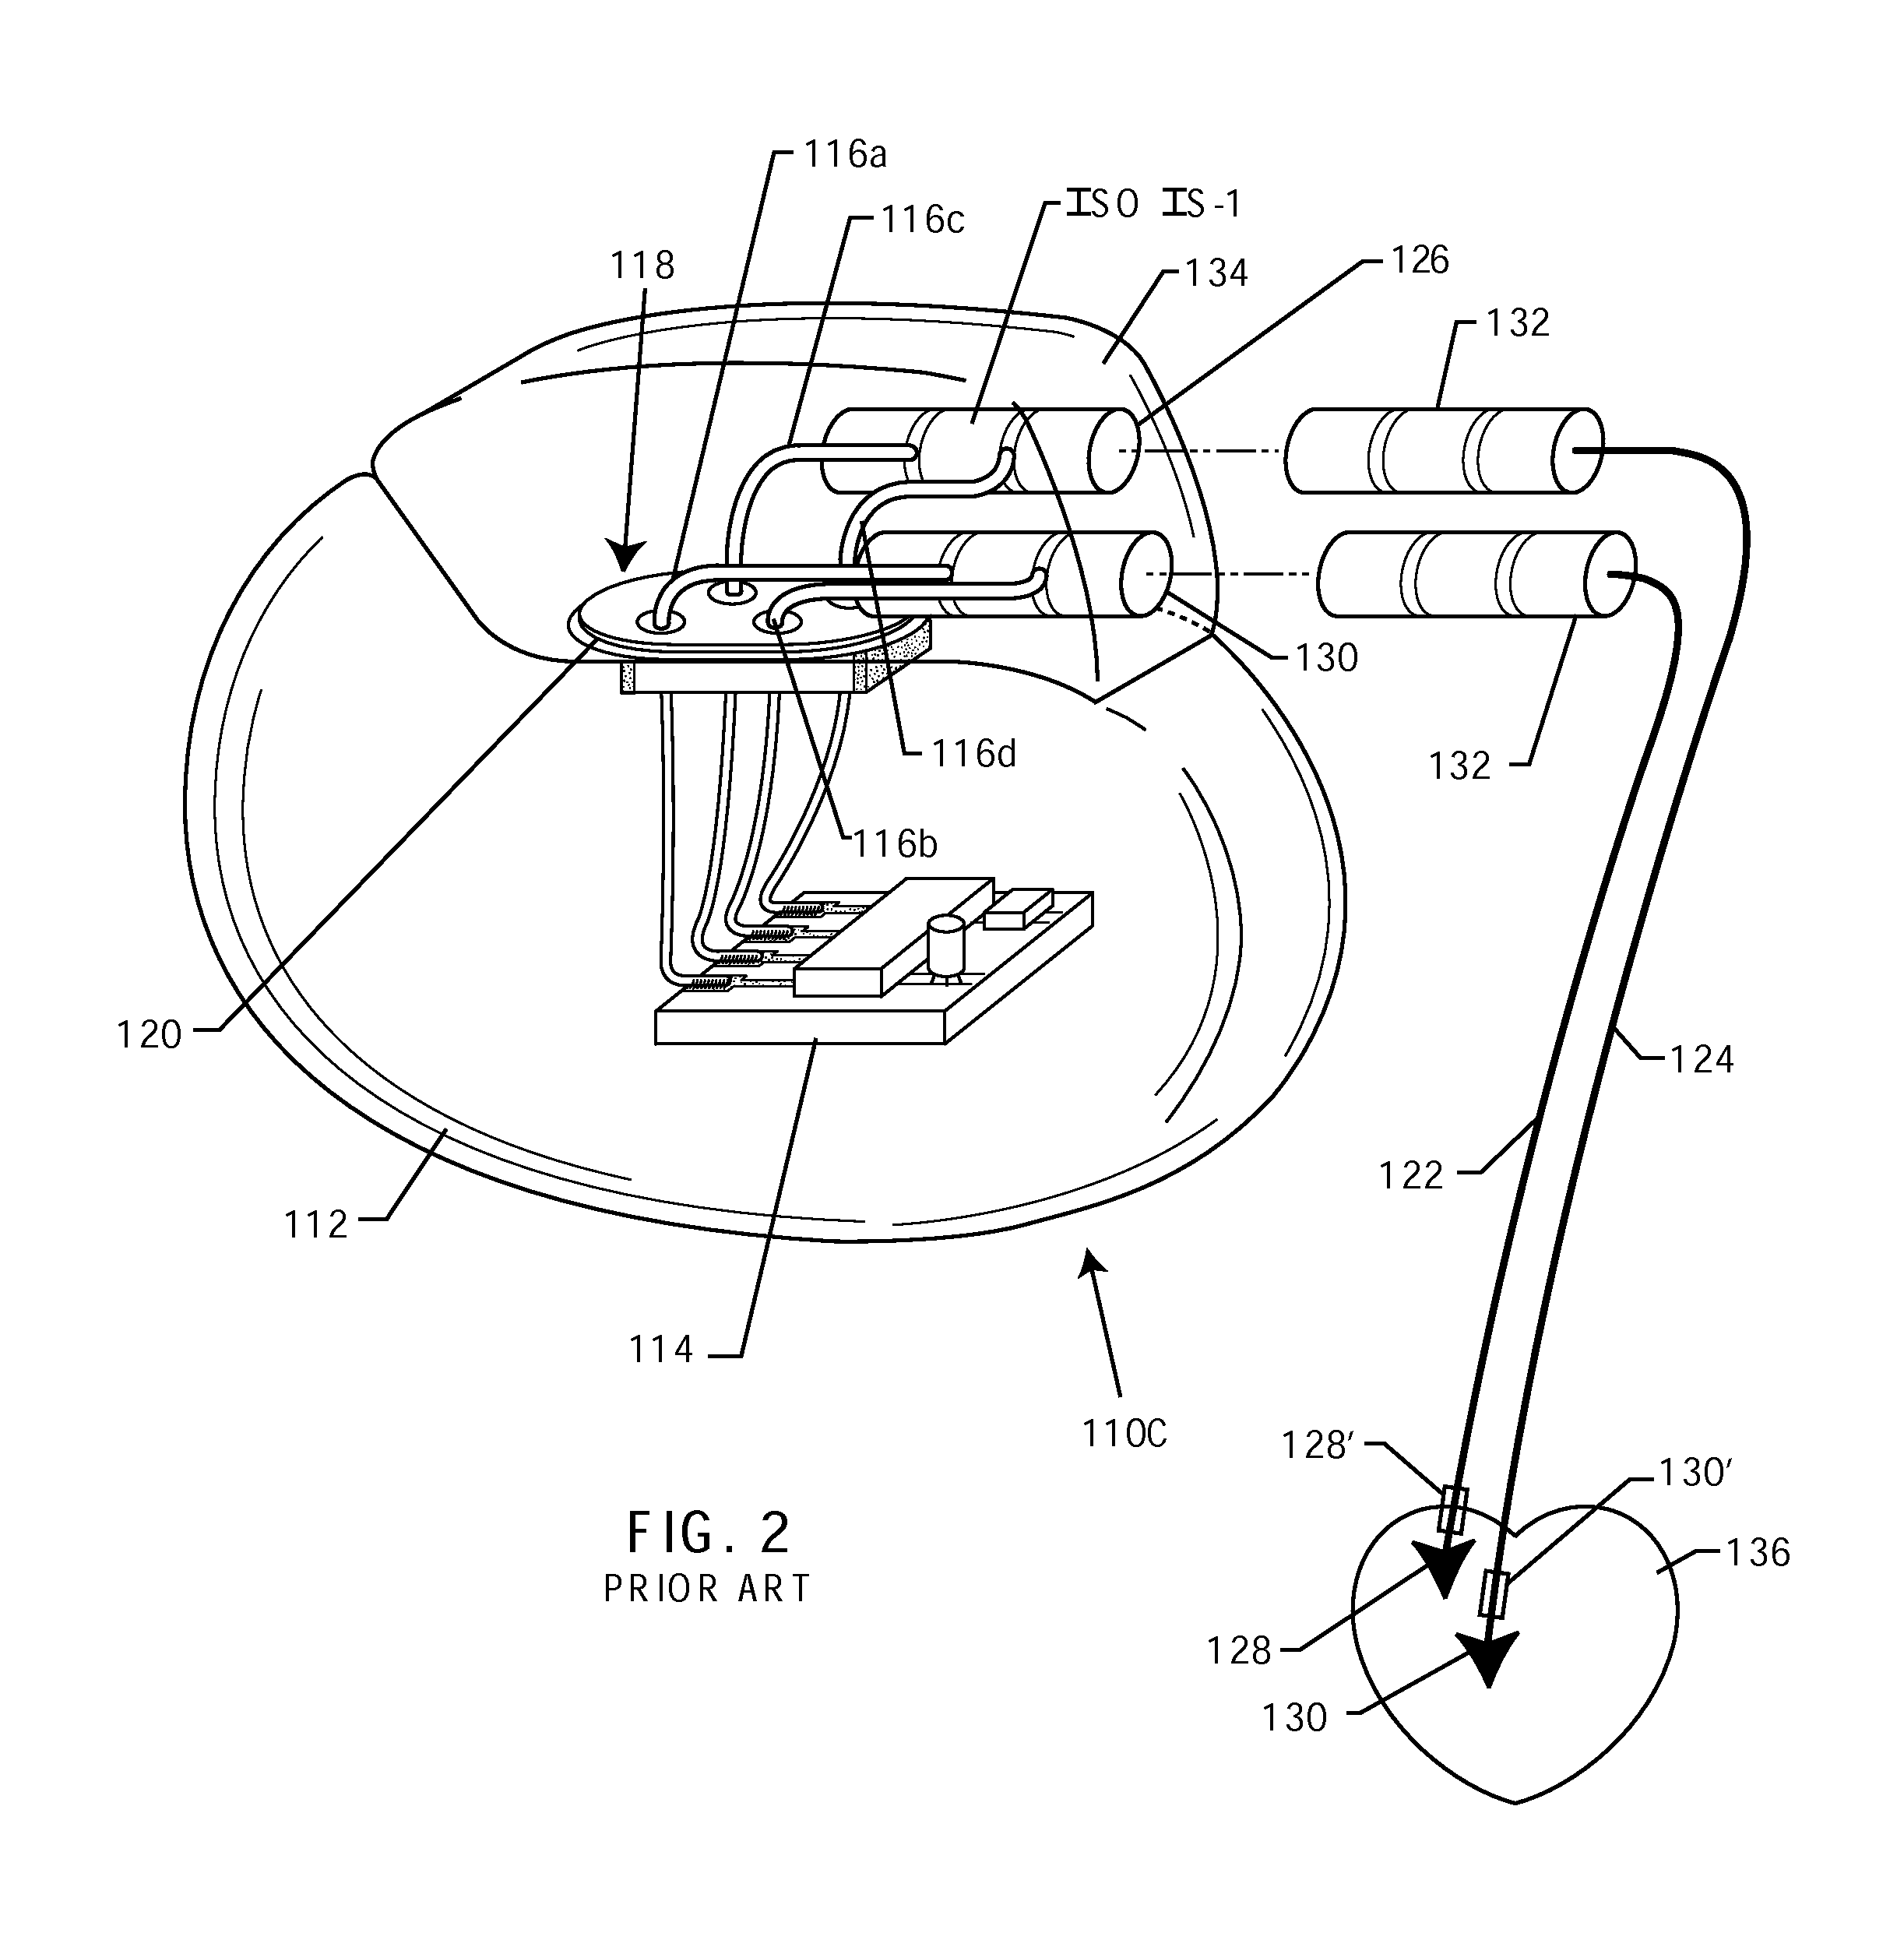 Composite RF current attenuator for a medical lead